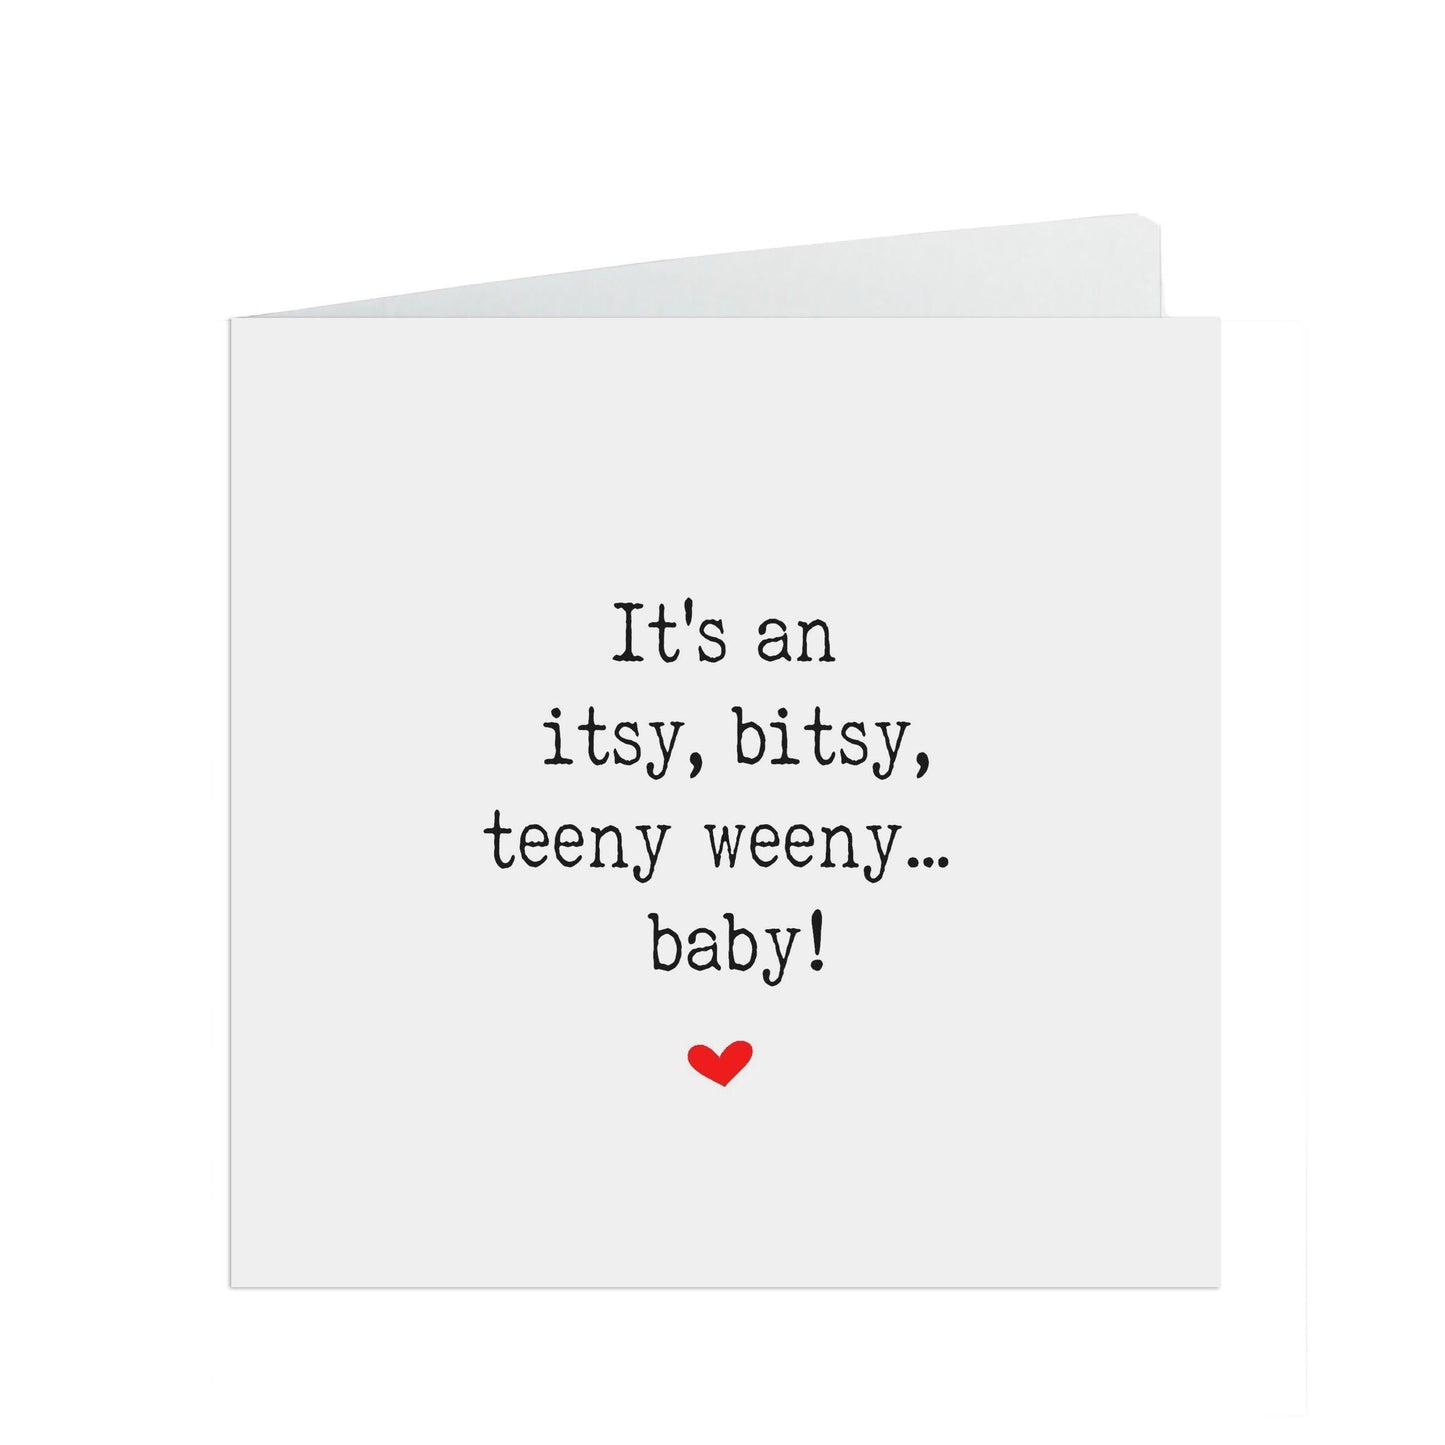  Its an itsy, bitsy, teeny weeny baby! funny new baby card by PMPRINTED 